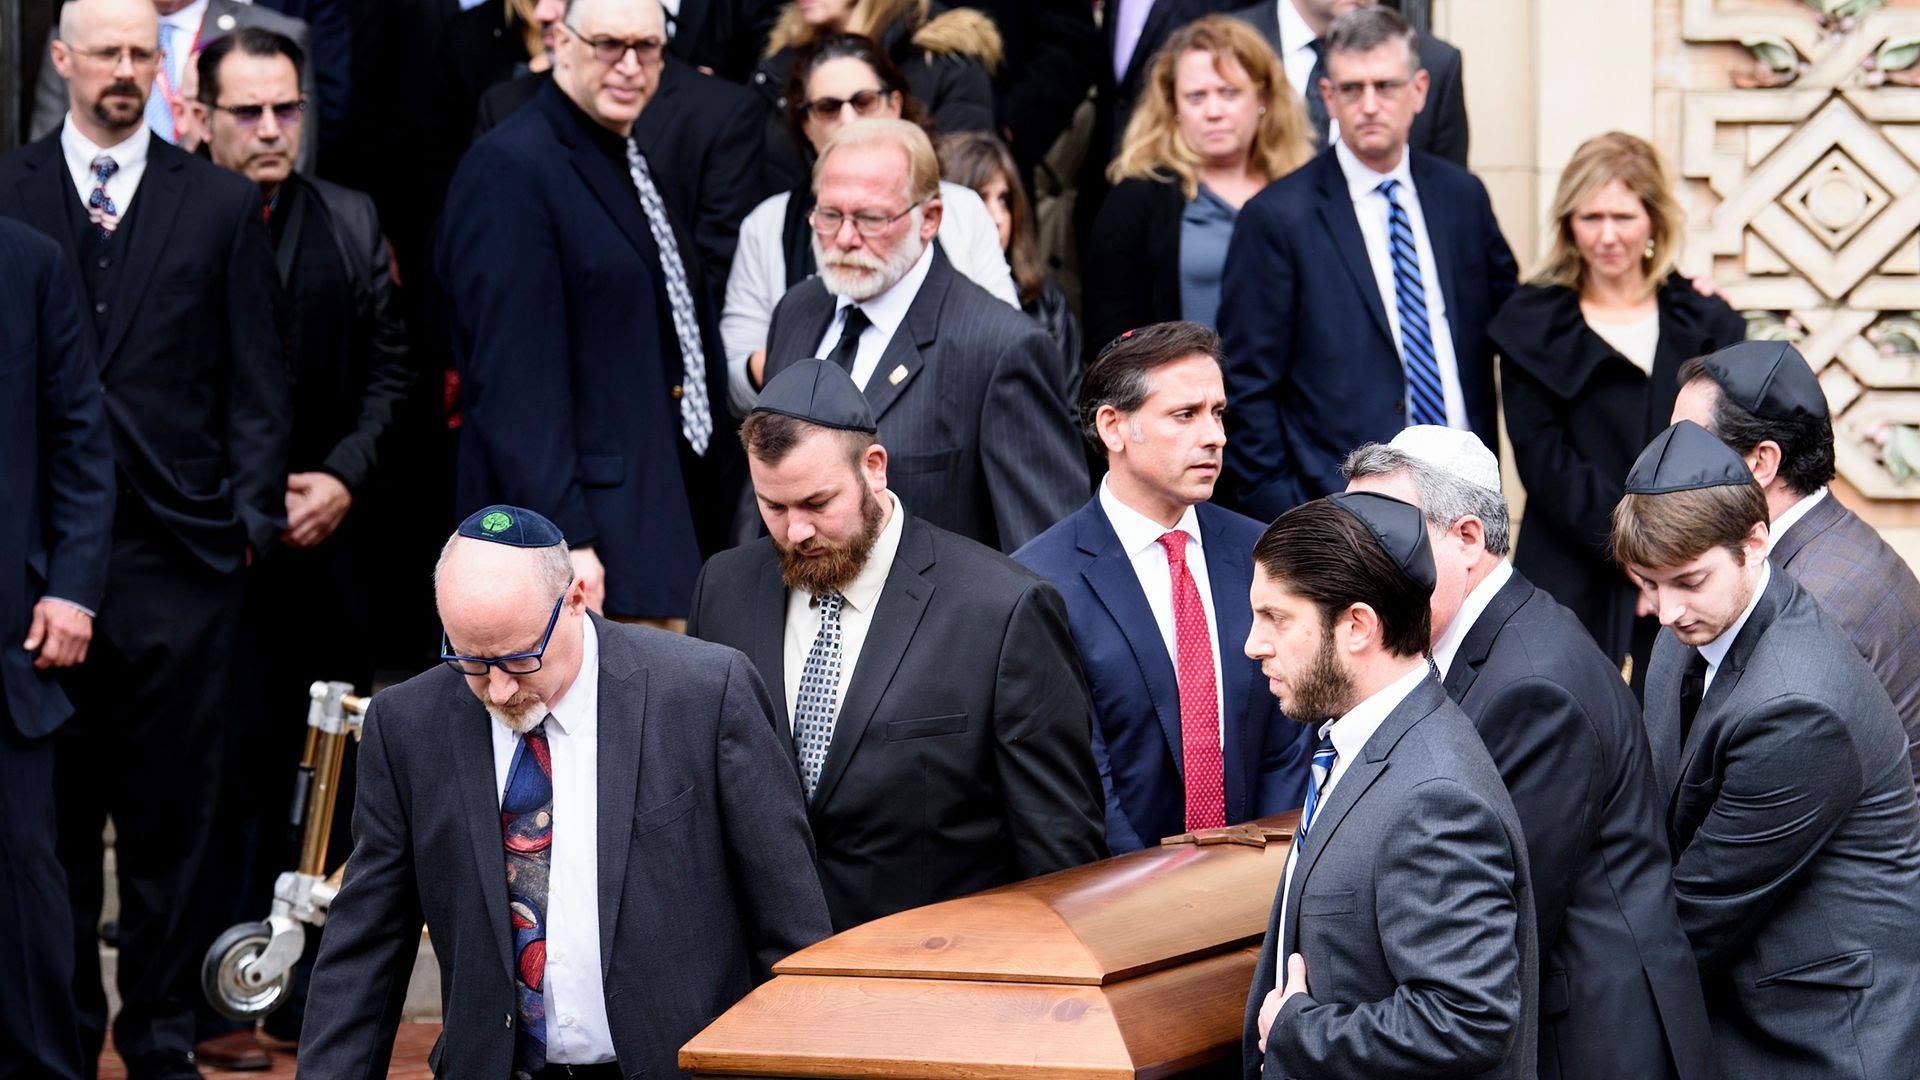 Pallbearers carry a casket from Rodef Shalom Congregation after a funeral for Cecil Rosenthal and David Rosenthal in Pittsburgh.